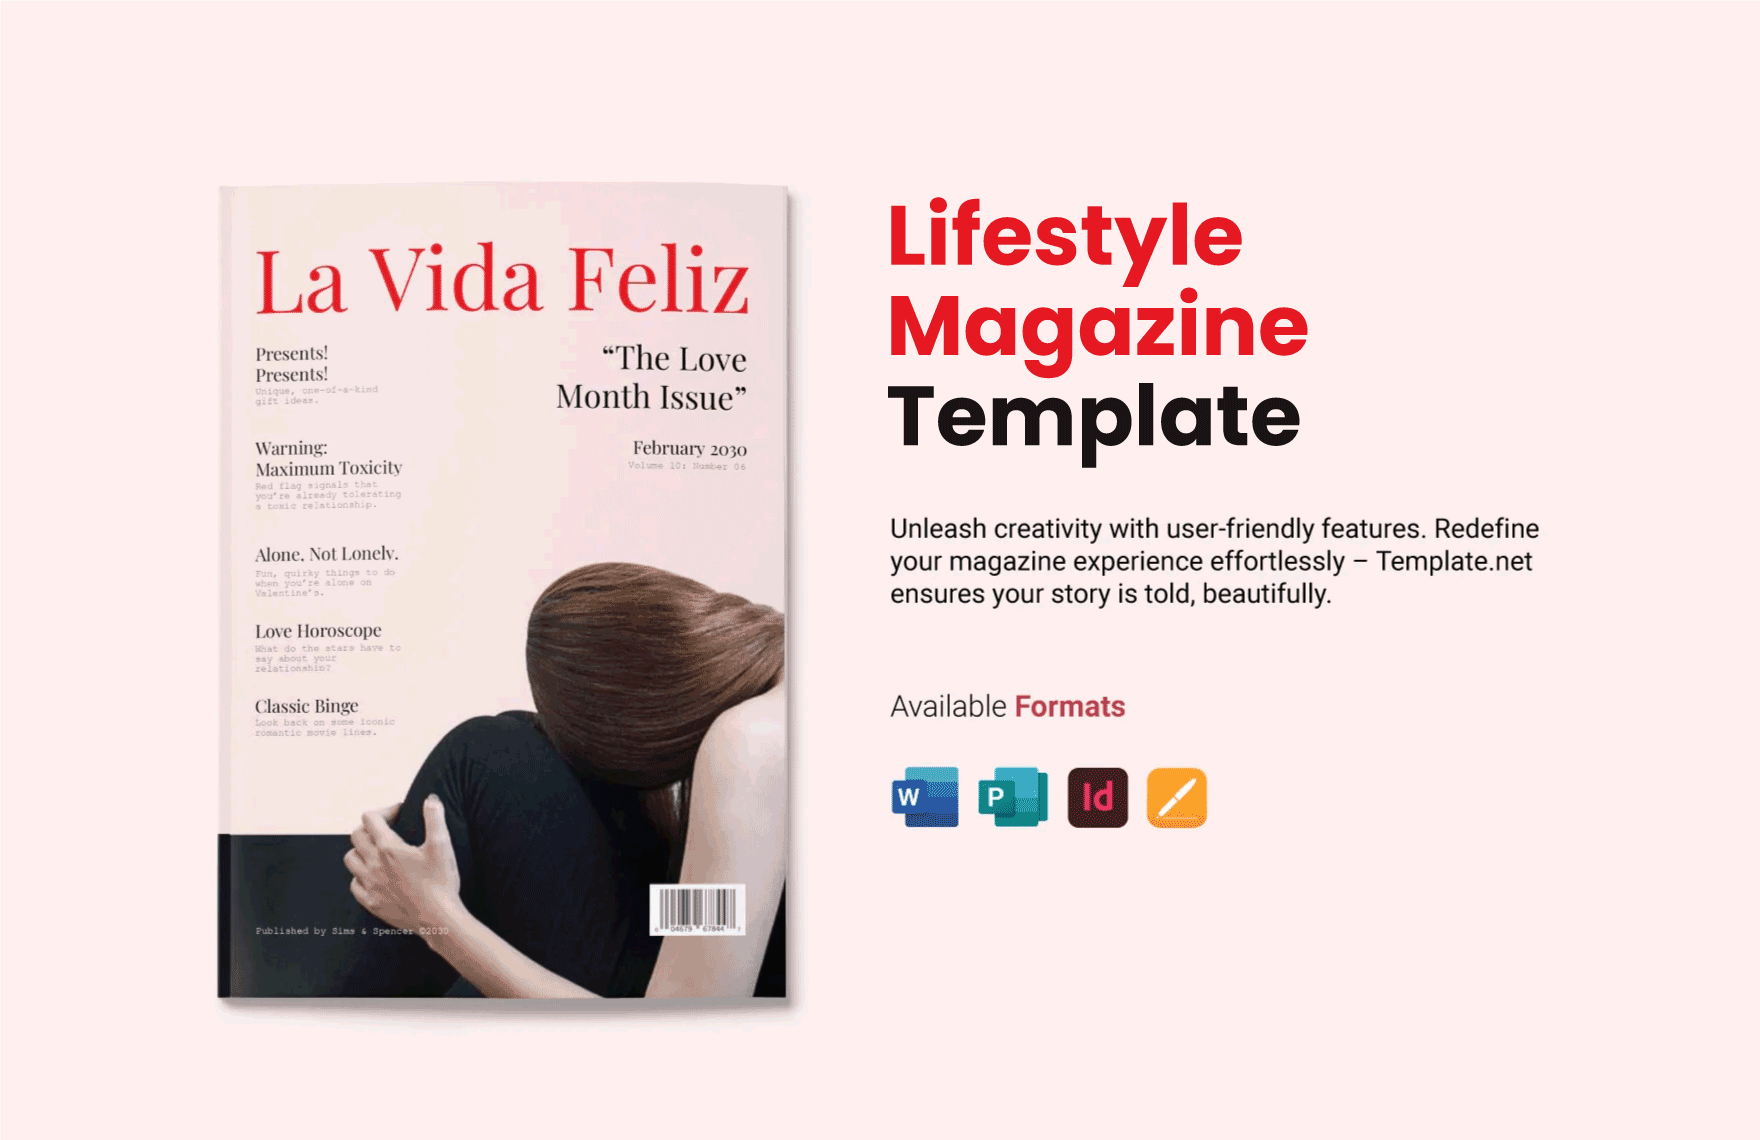 Lifestyle Magazine Template in Word, Apple Pages, Publisher, InDesign